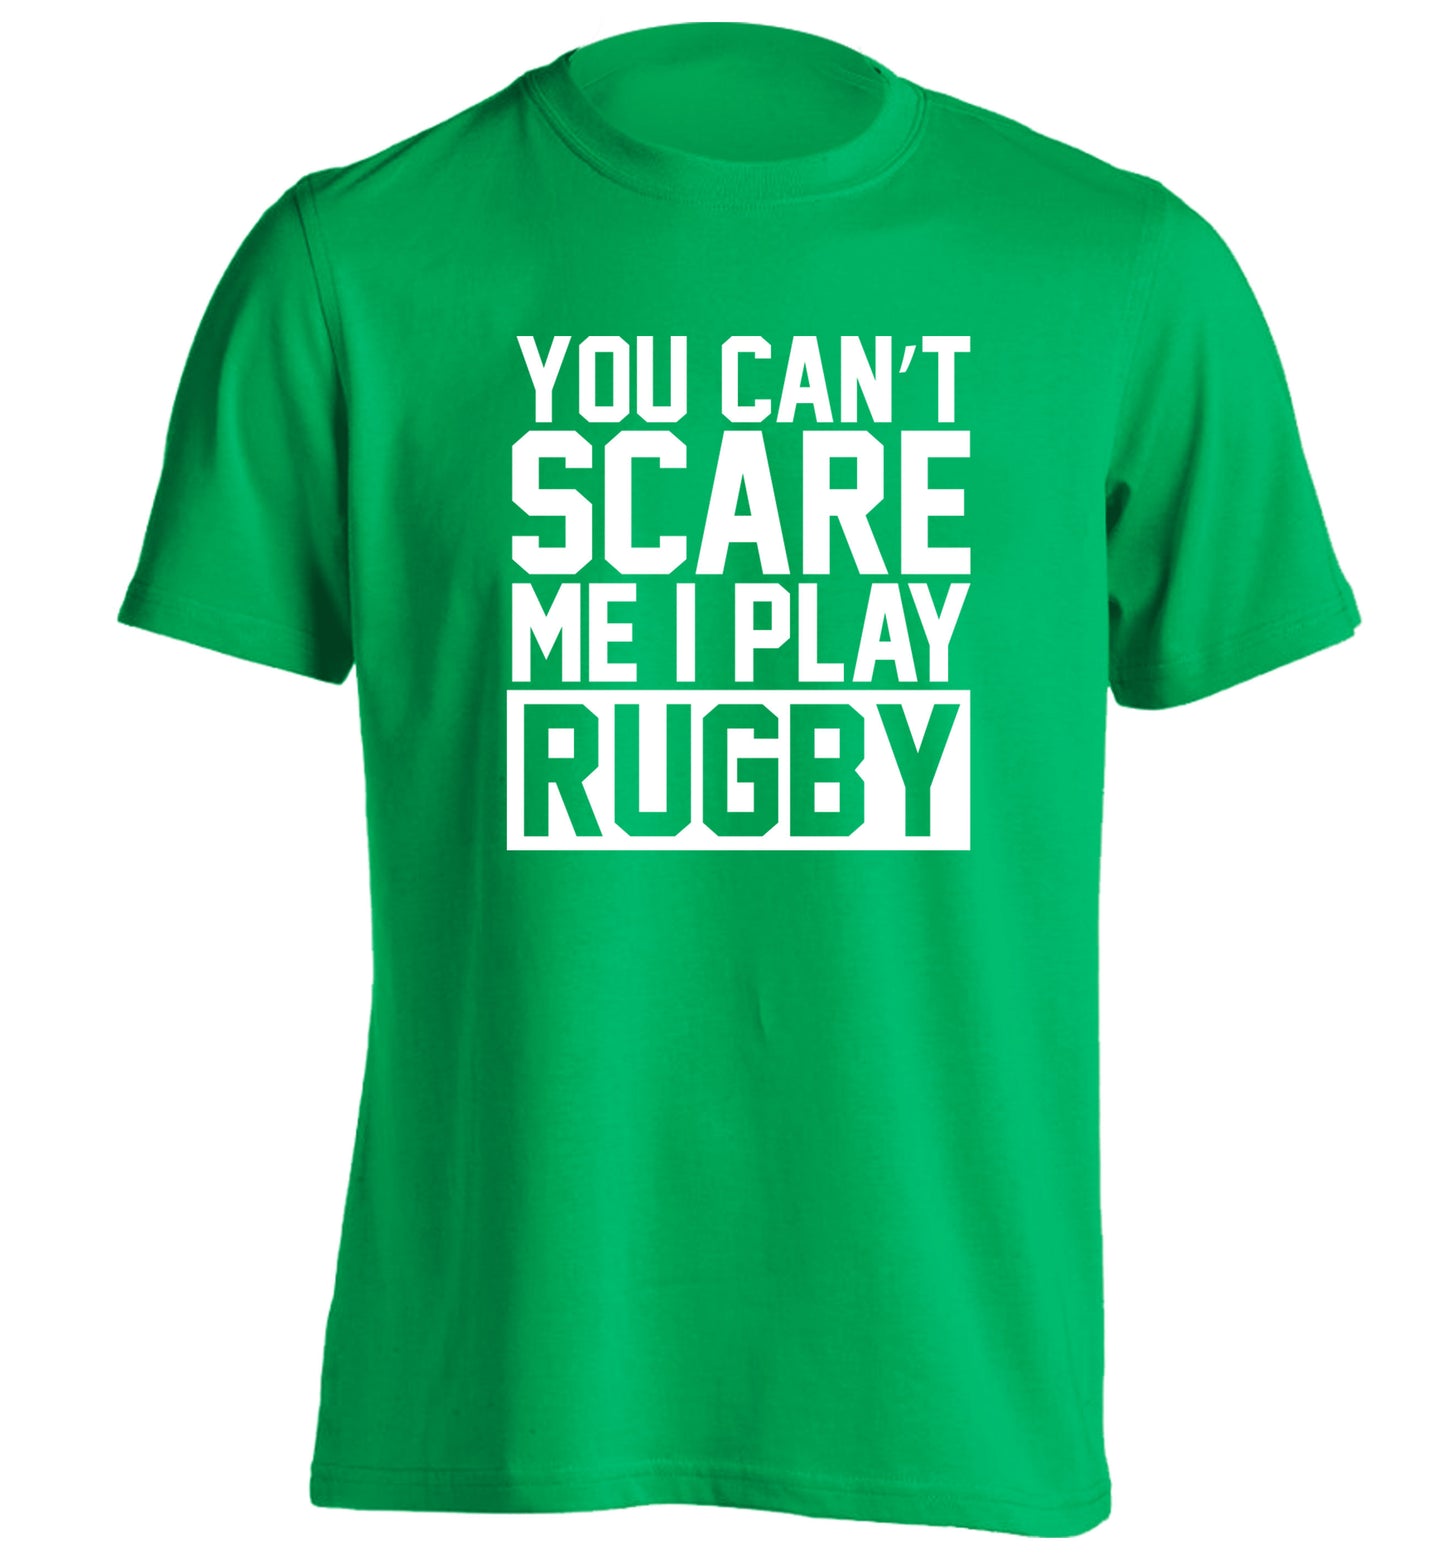 You can't scare me I play rugby adults unisex green Tshirt 2XL